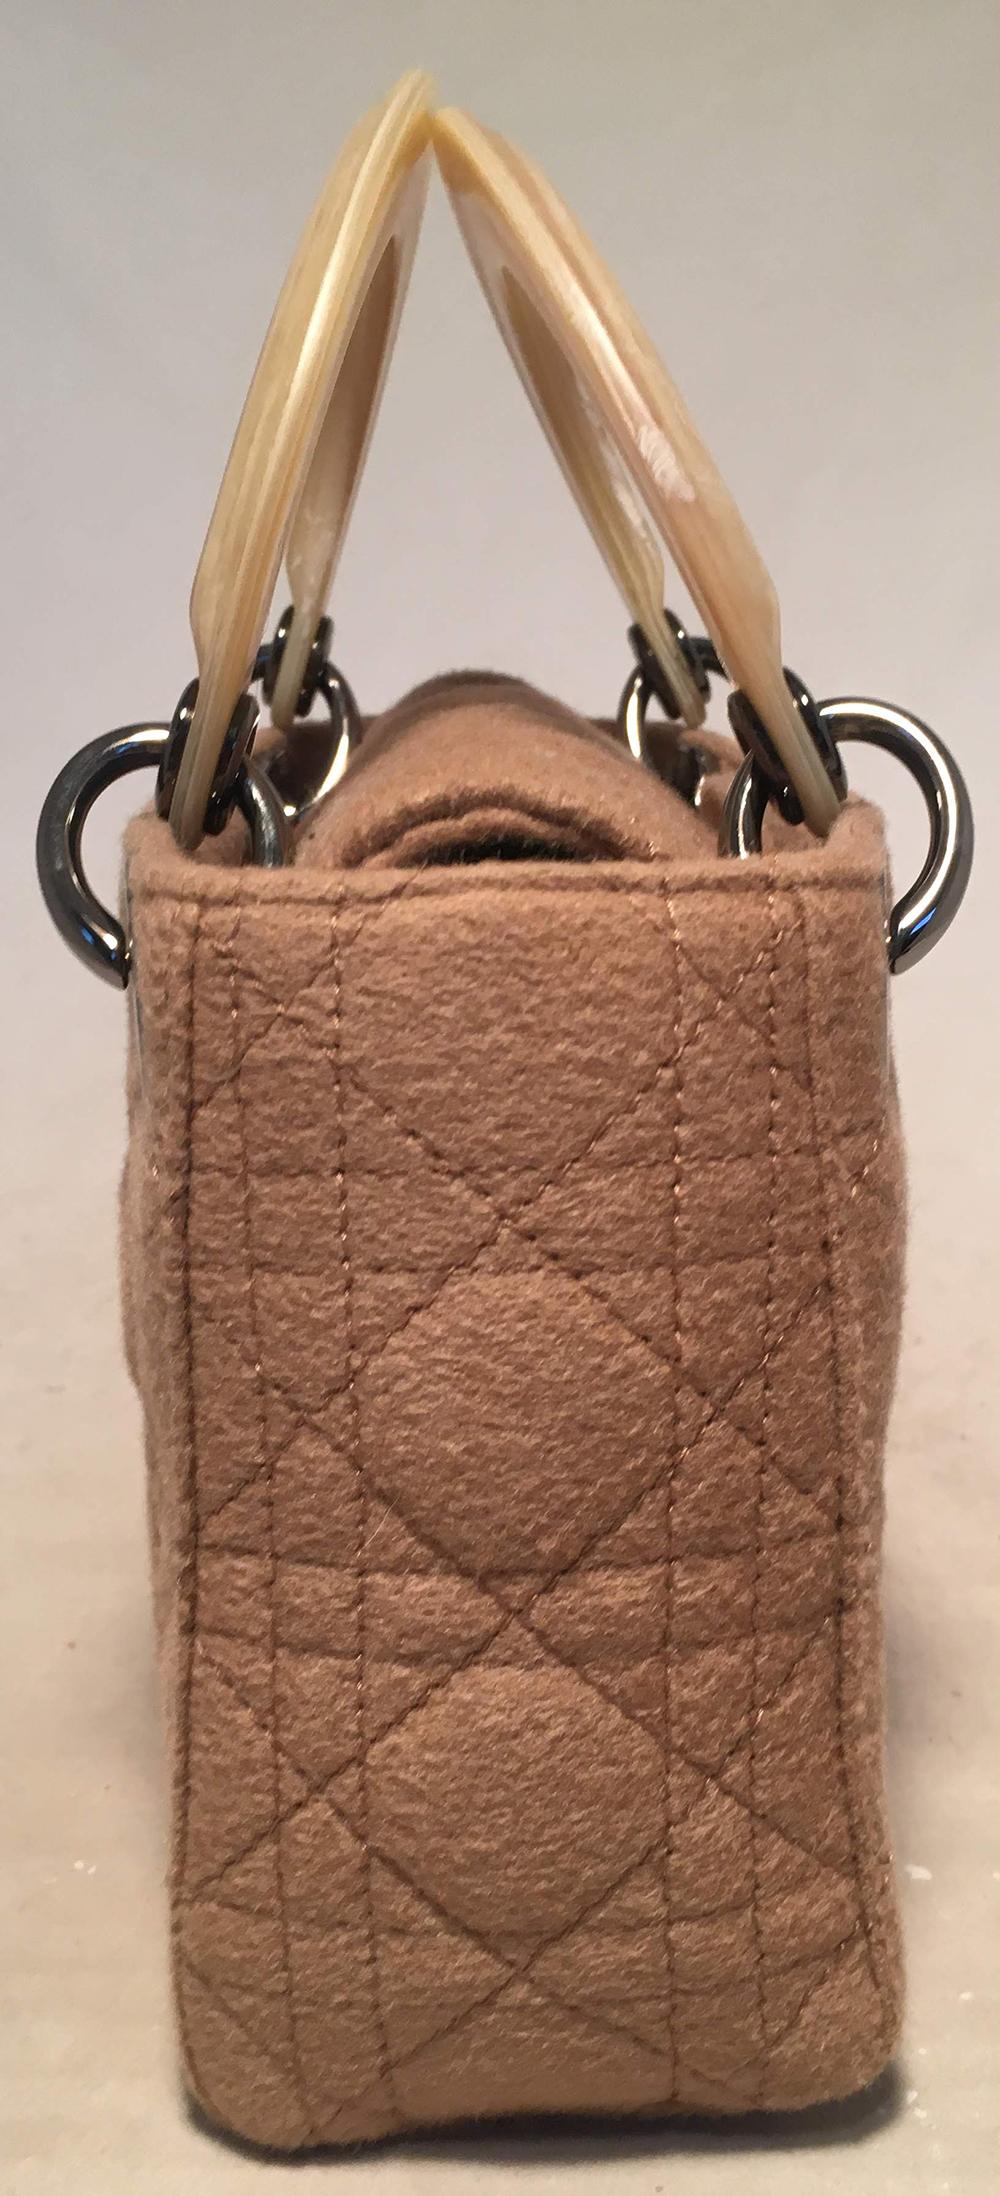 Dior Vintage Mini Lady Dior Tan Wool Cannage Quilted Bag in excellent condition. Tan wool cannage quilted body trimmed with gunmetal hardware and beige brushed resin handles. Top flap snap closure opens to a matching brown nylon interior that holds